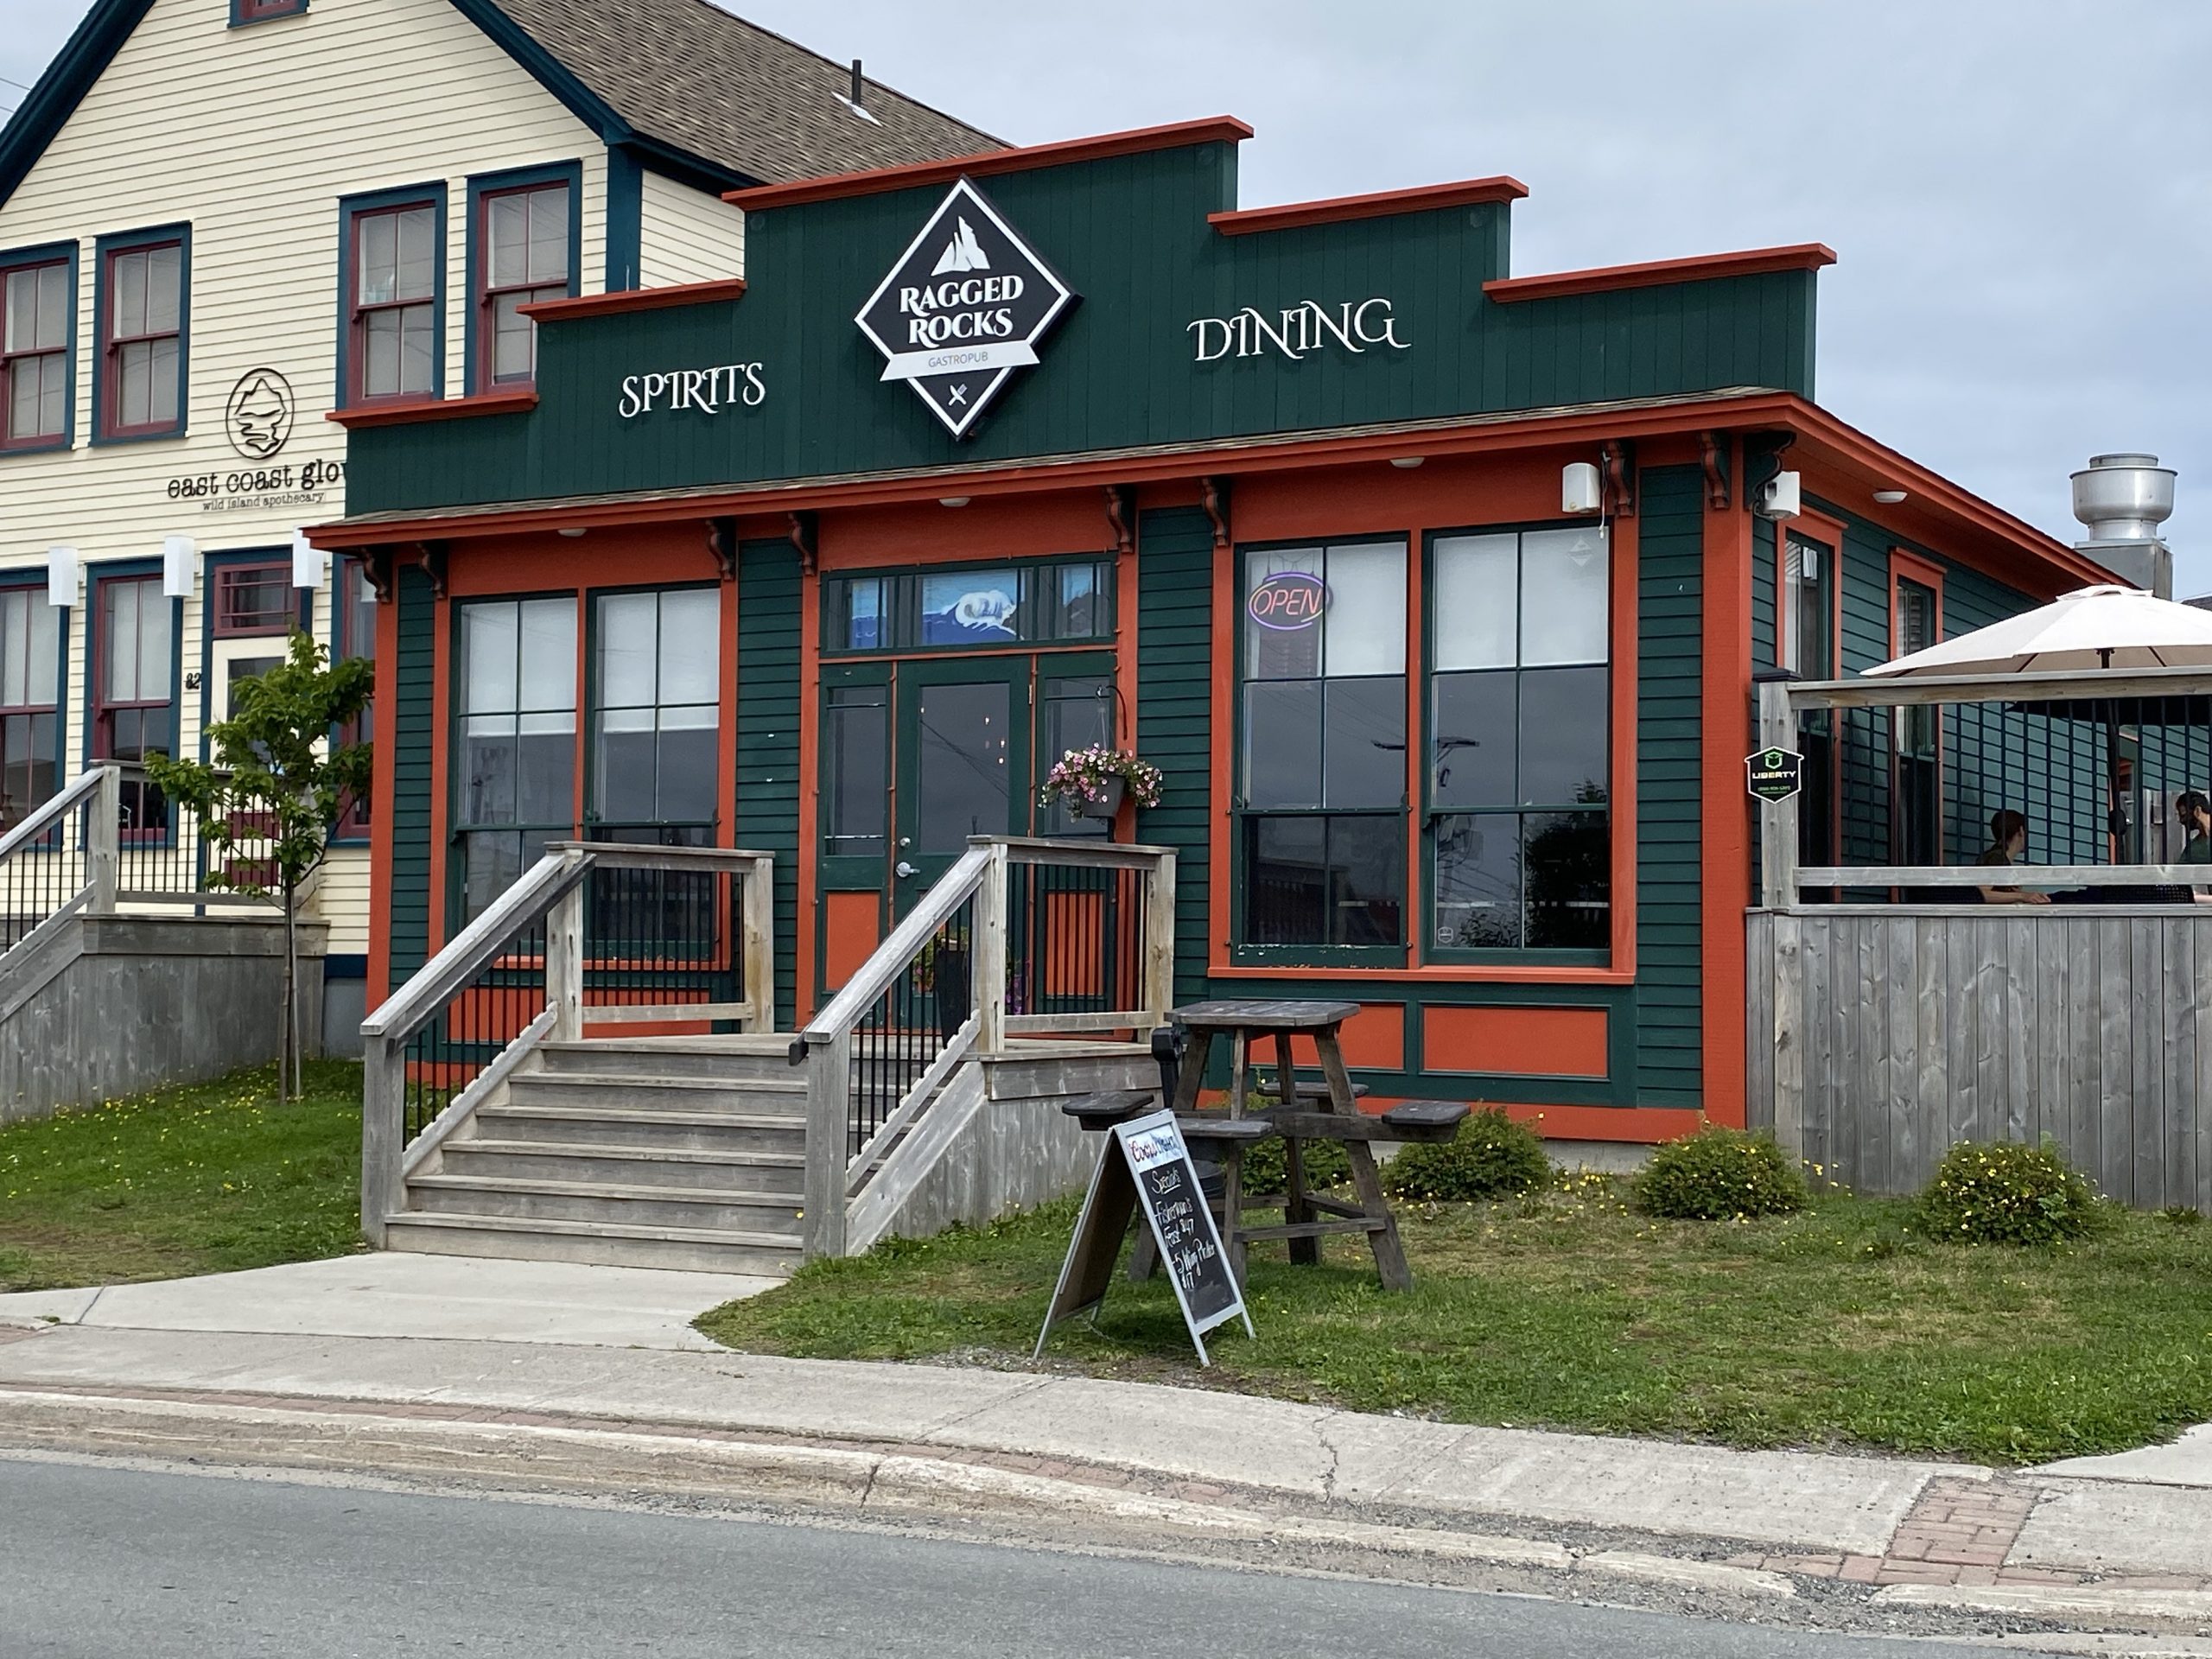 The Ragged Rocks Gastropub, where we elected to have lunch in Bonavista in Newfoundland.